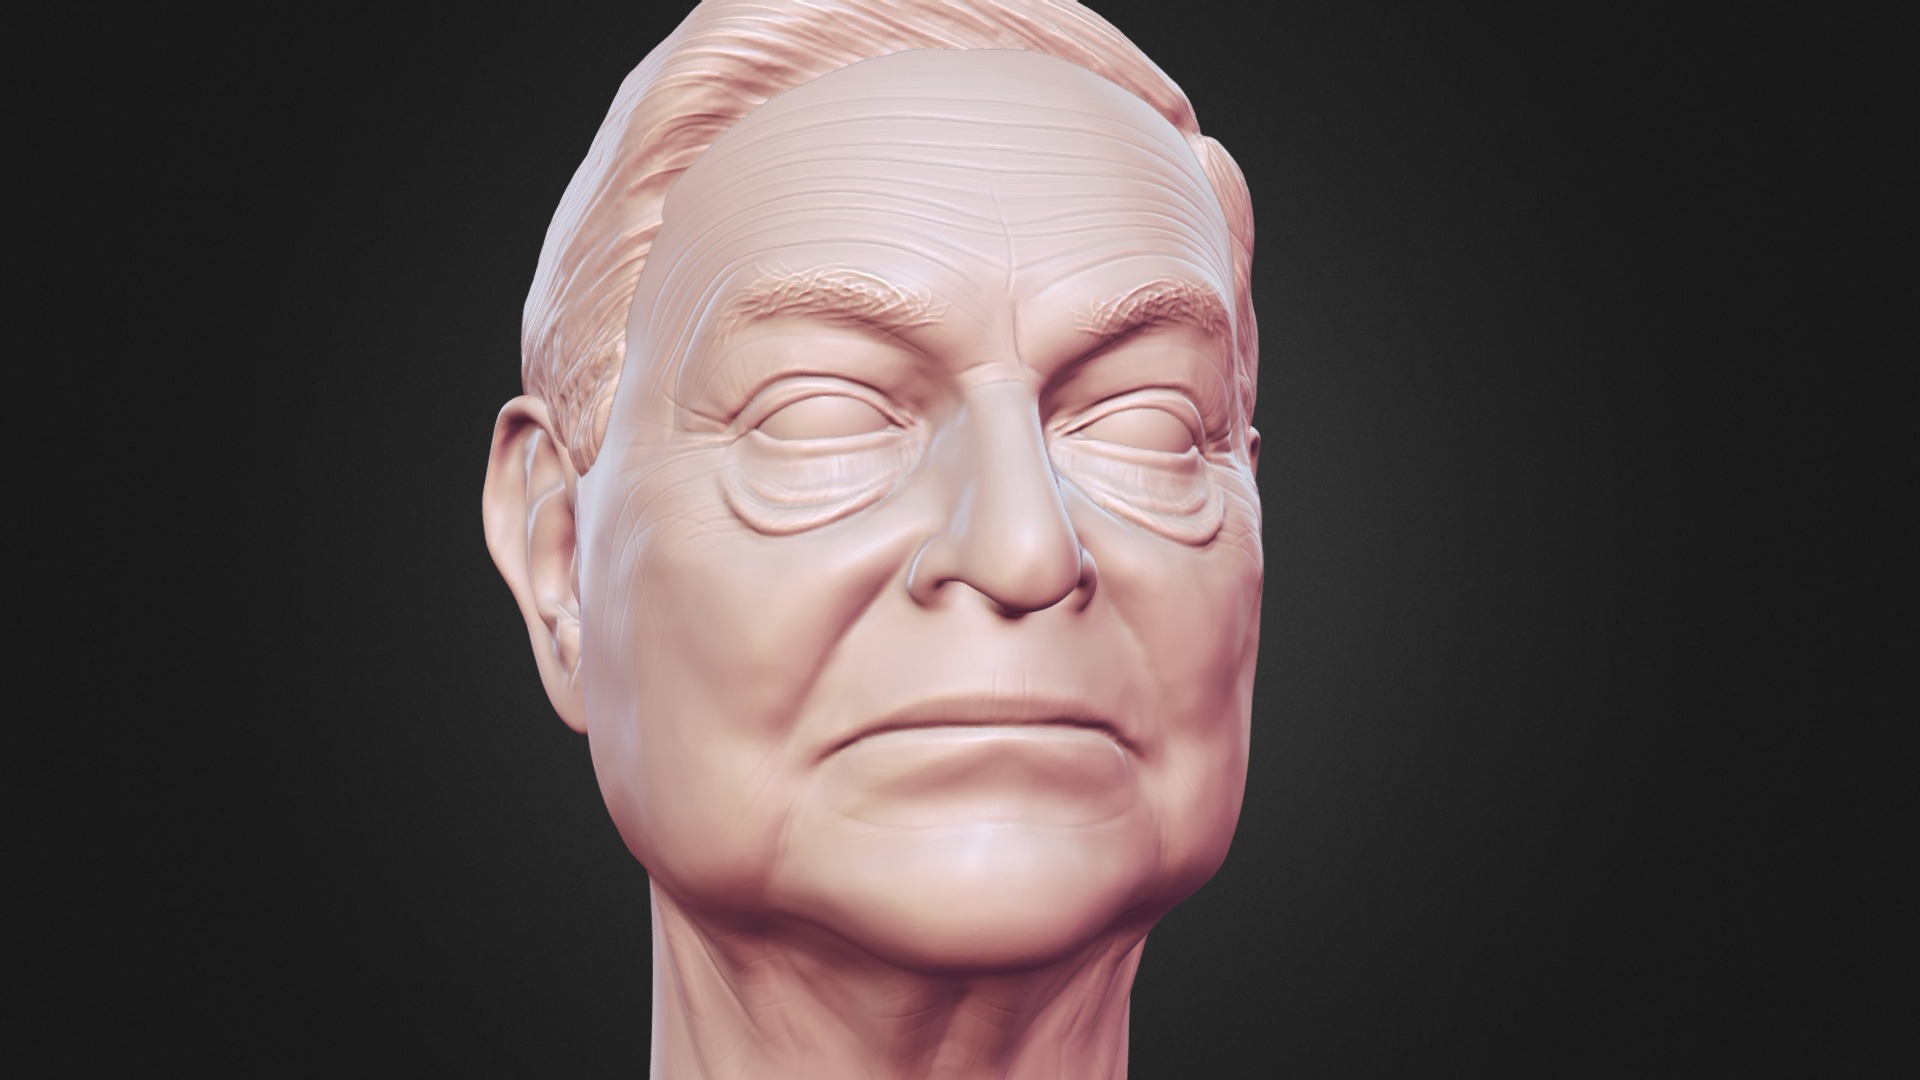 3D model George Soros 3D printable portrait sculpture - This is a 3D model of the George Soros 3D printable portrait sculpture. The 3D model is about a statue of a person with glasses.